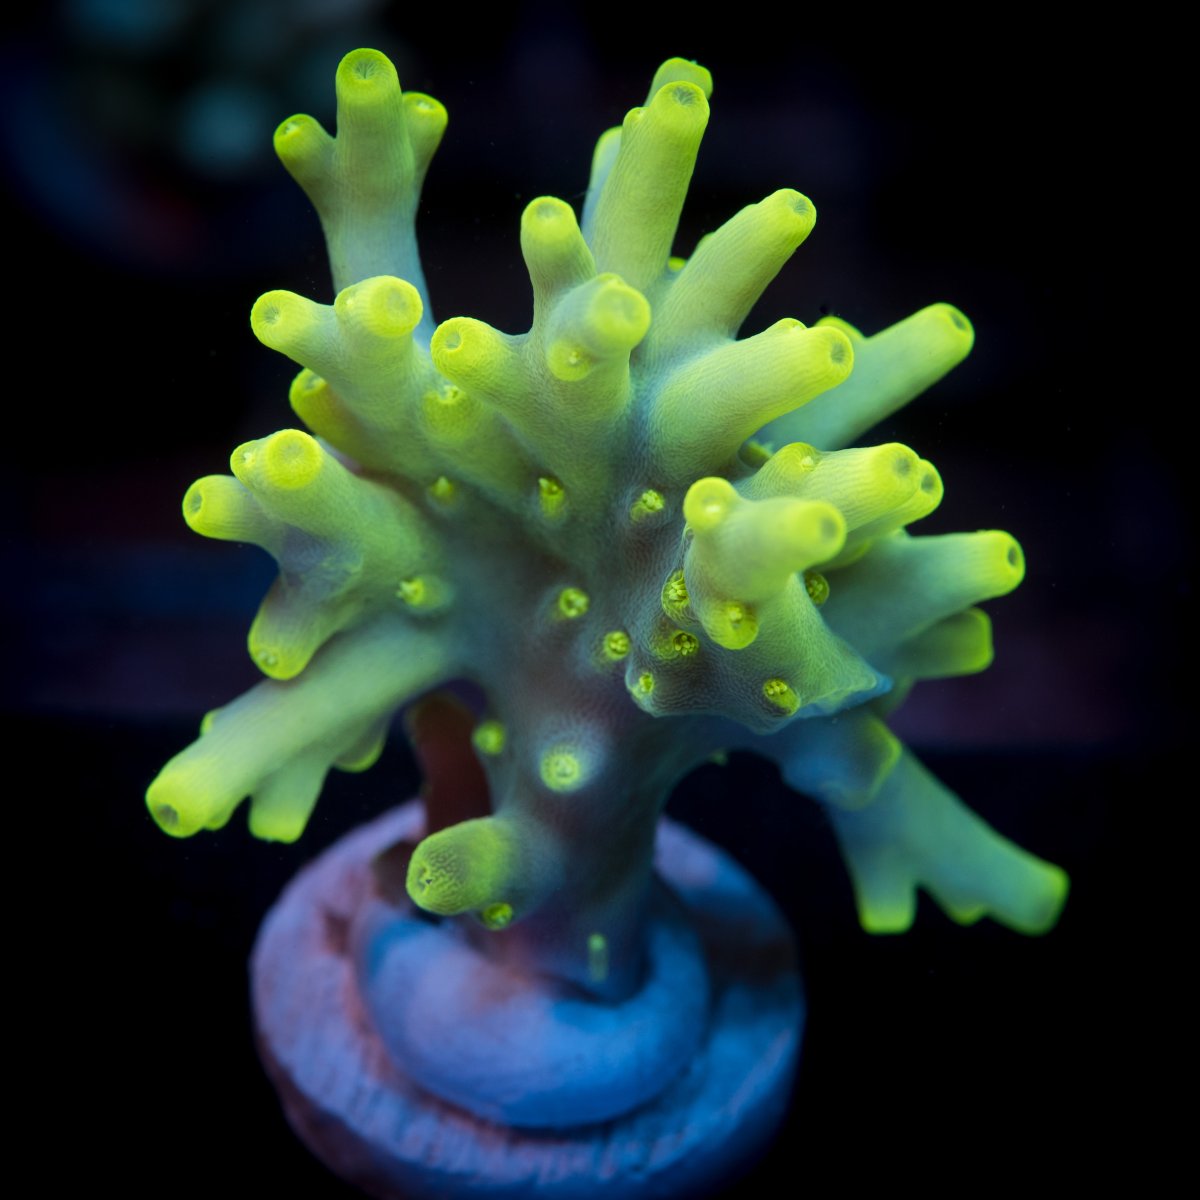 Acro drop!! Best prices around-Take a look! | REEF2REEF Saltwater and ...